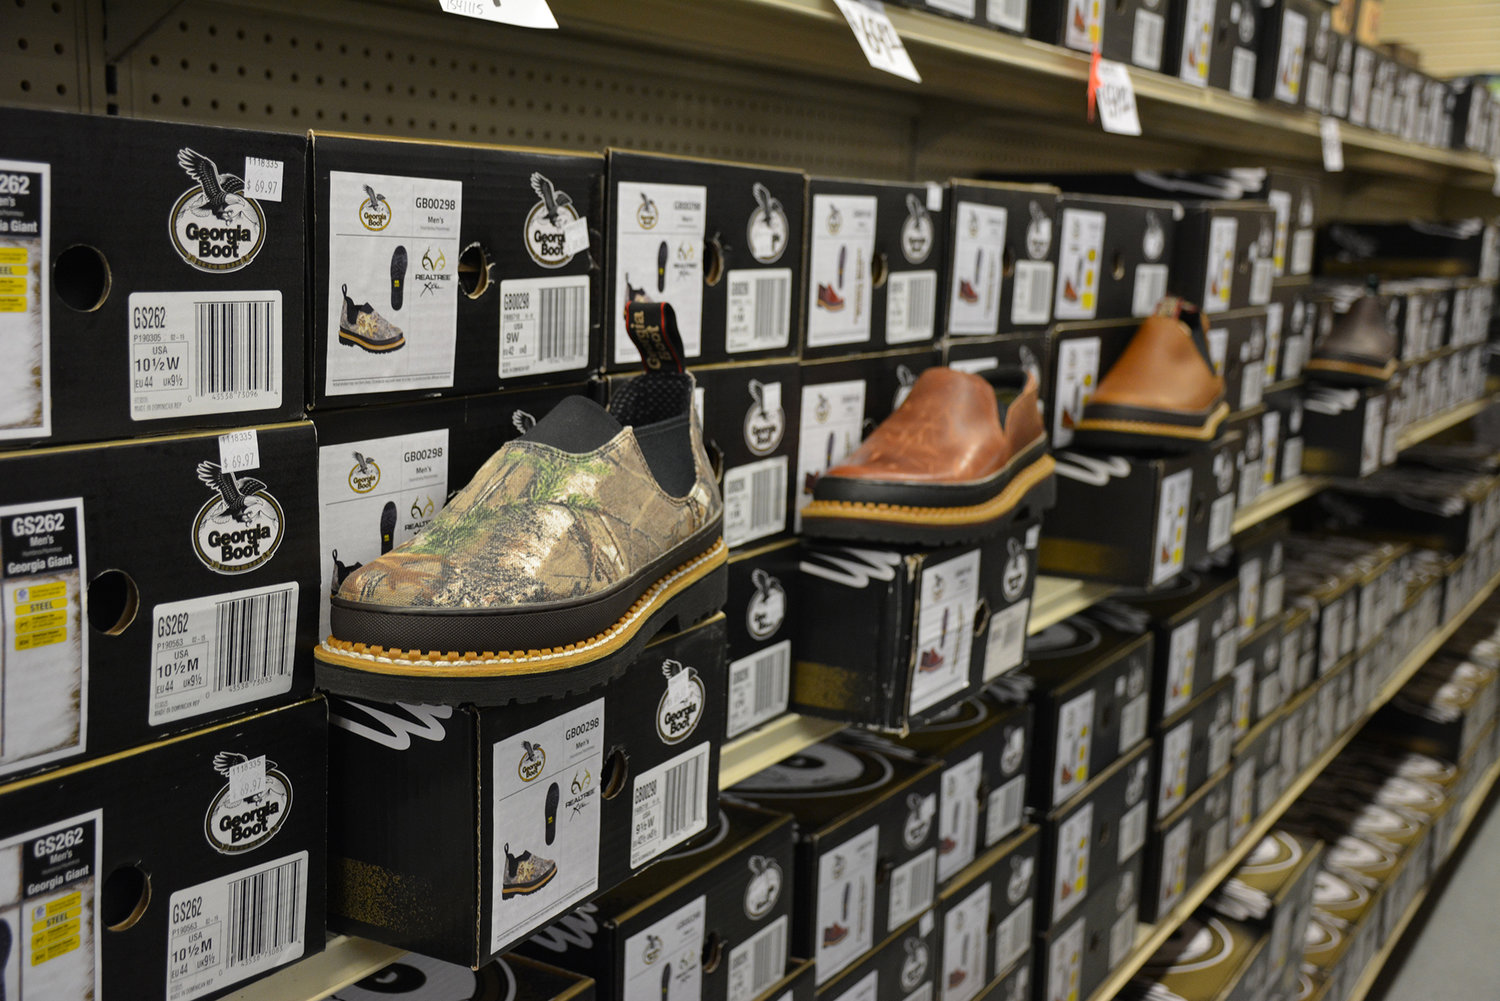 A line of Georgia Boot Romeos on display at the Yelm Sunbird Shopping Center.